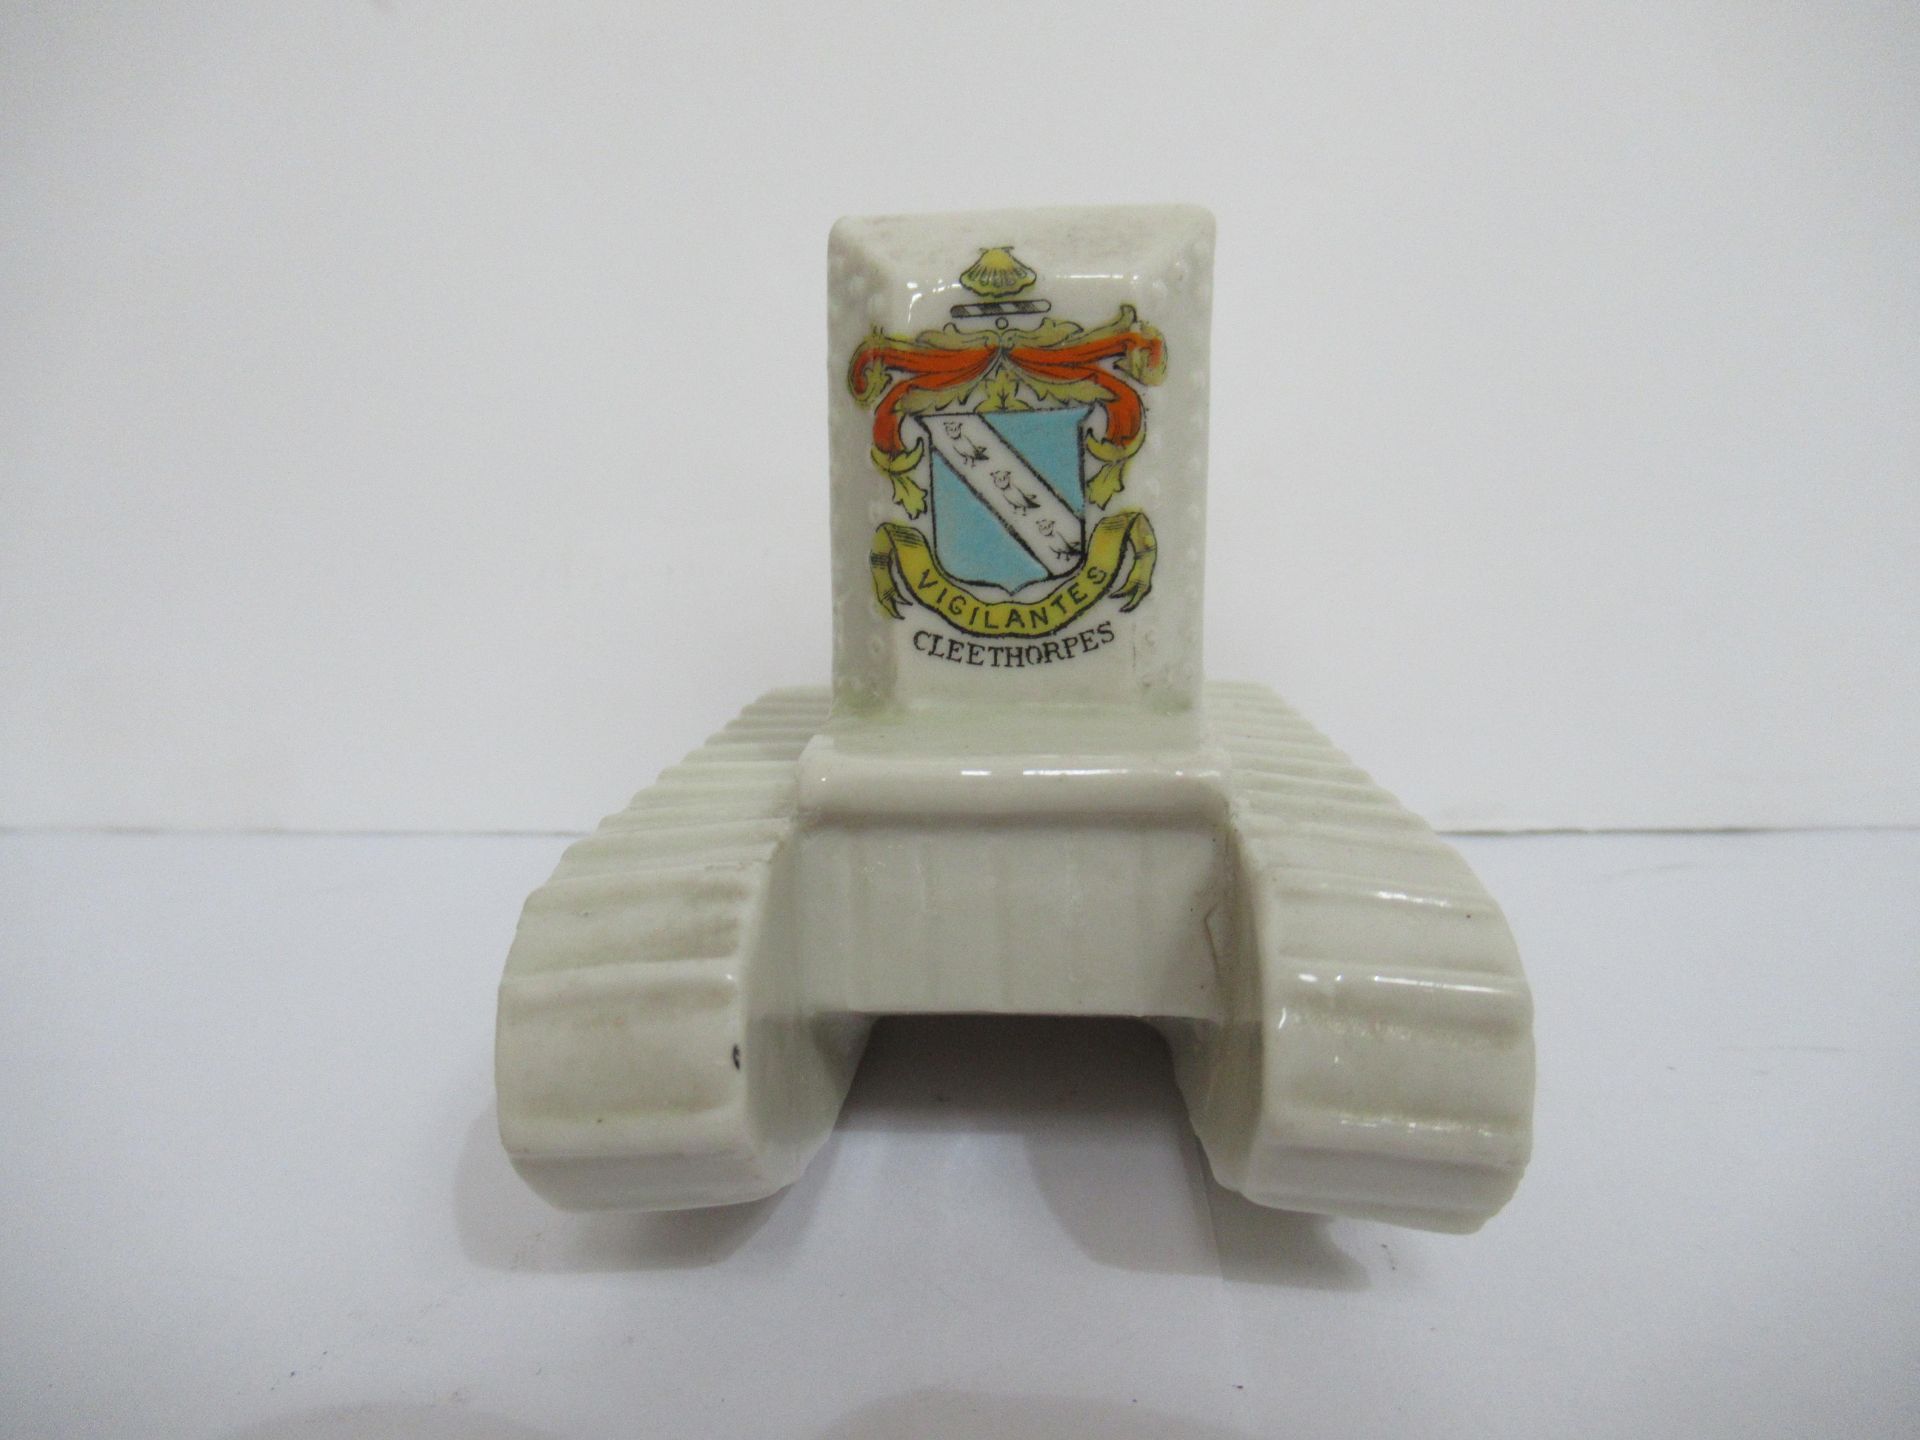 Crested China model of tracked vehicle with Cleethorpes coat of arms (115mm x 60mm) - Image 4 of 8